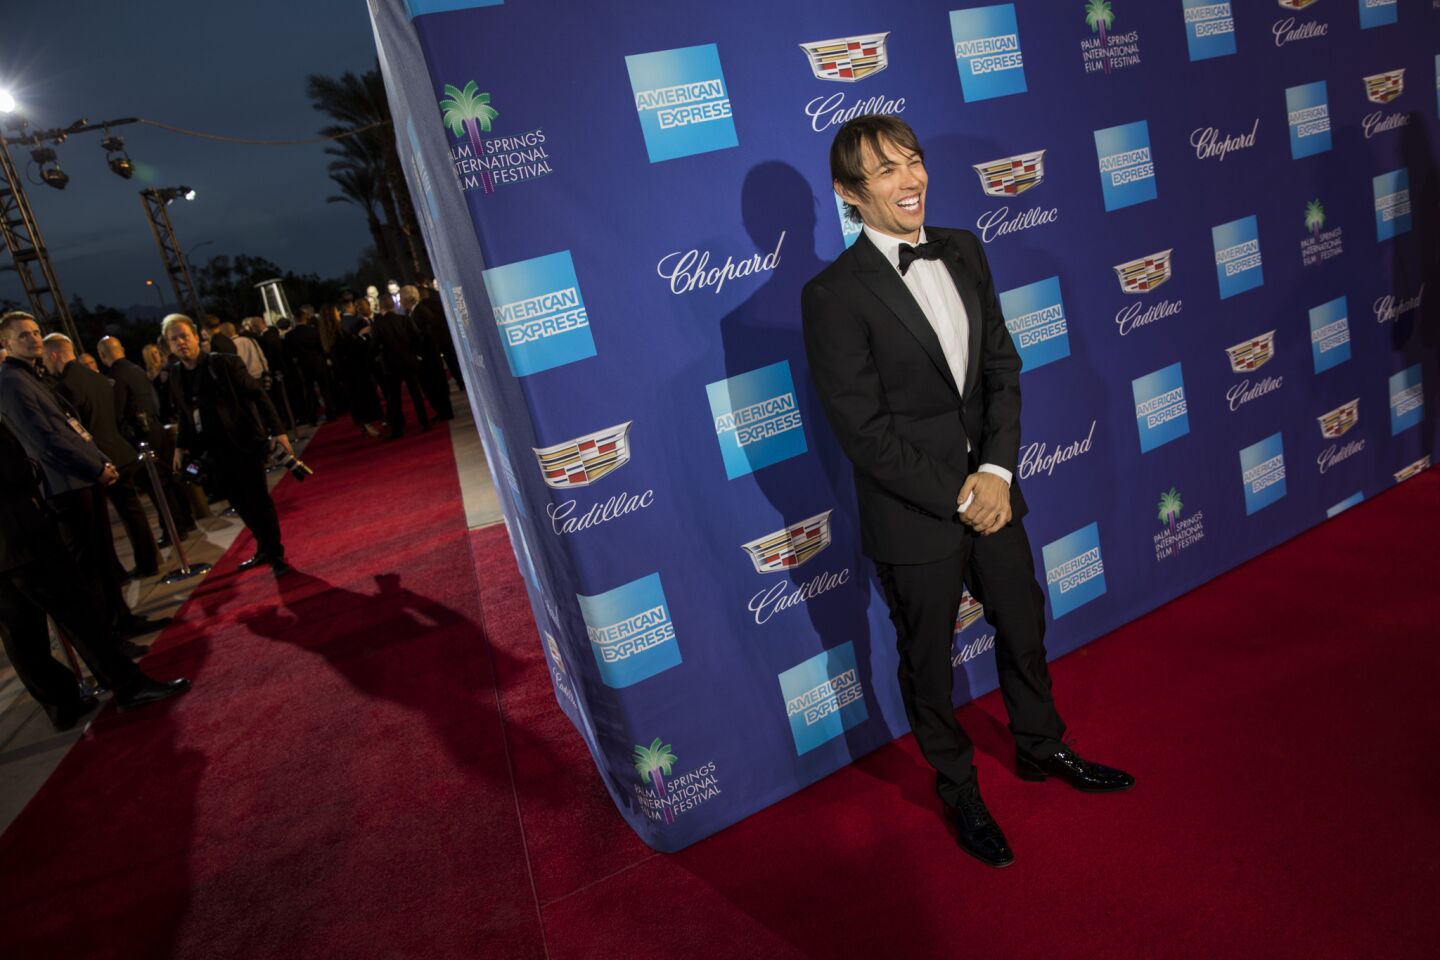 "The Florida Project" director Sean Baker on the red carpet of the 18th annual Palm Springs International Film Festival Gala.